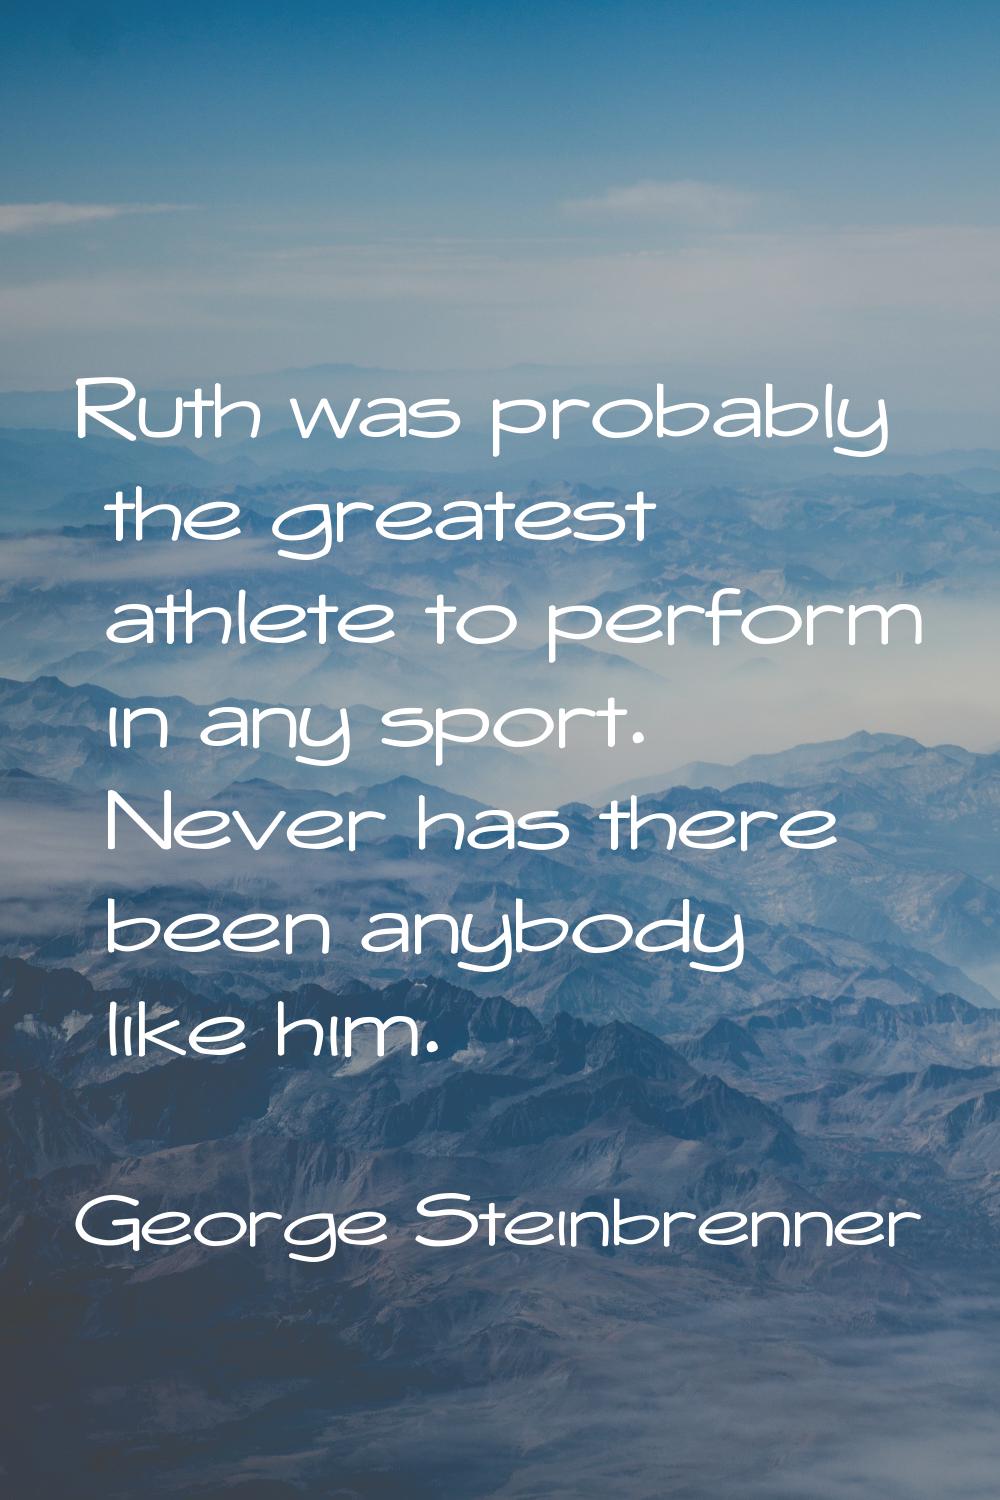 Ruth was probably the greatest athlete to perform in any sport. Never has there been anybody like h